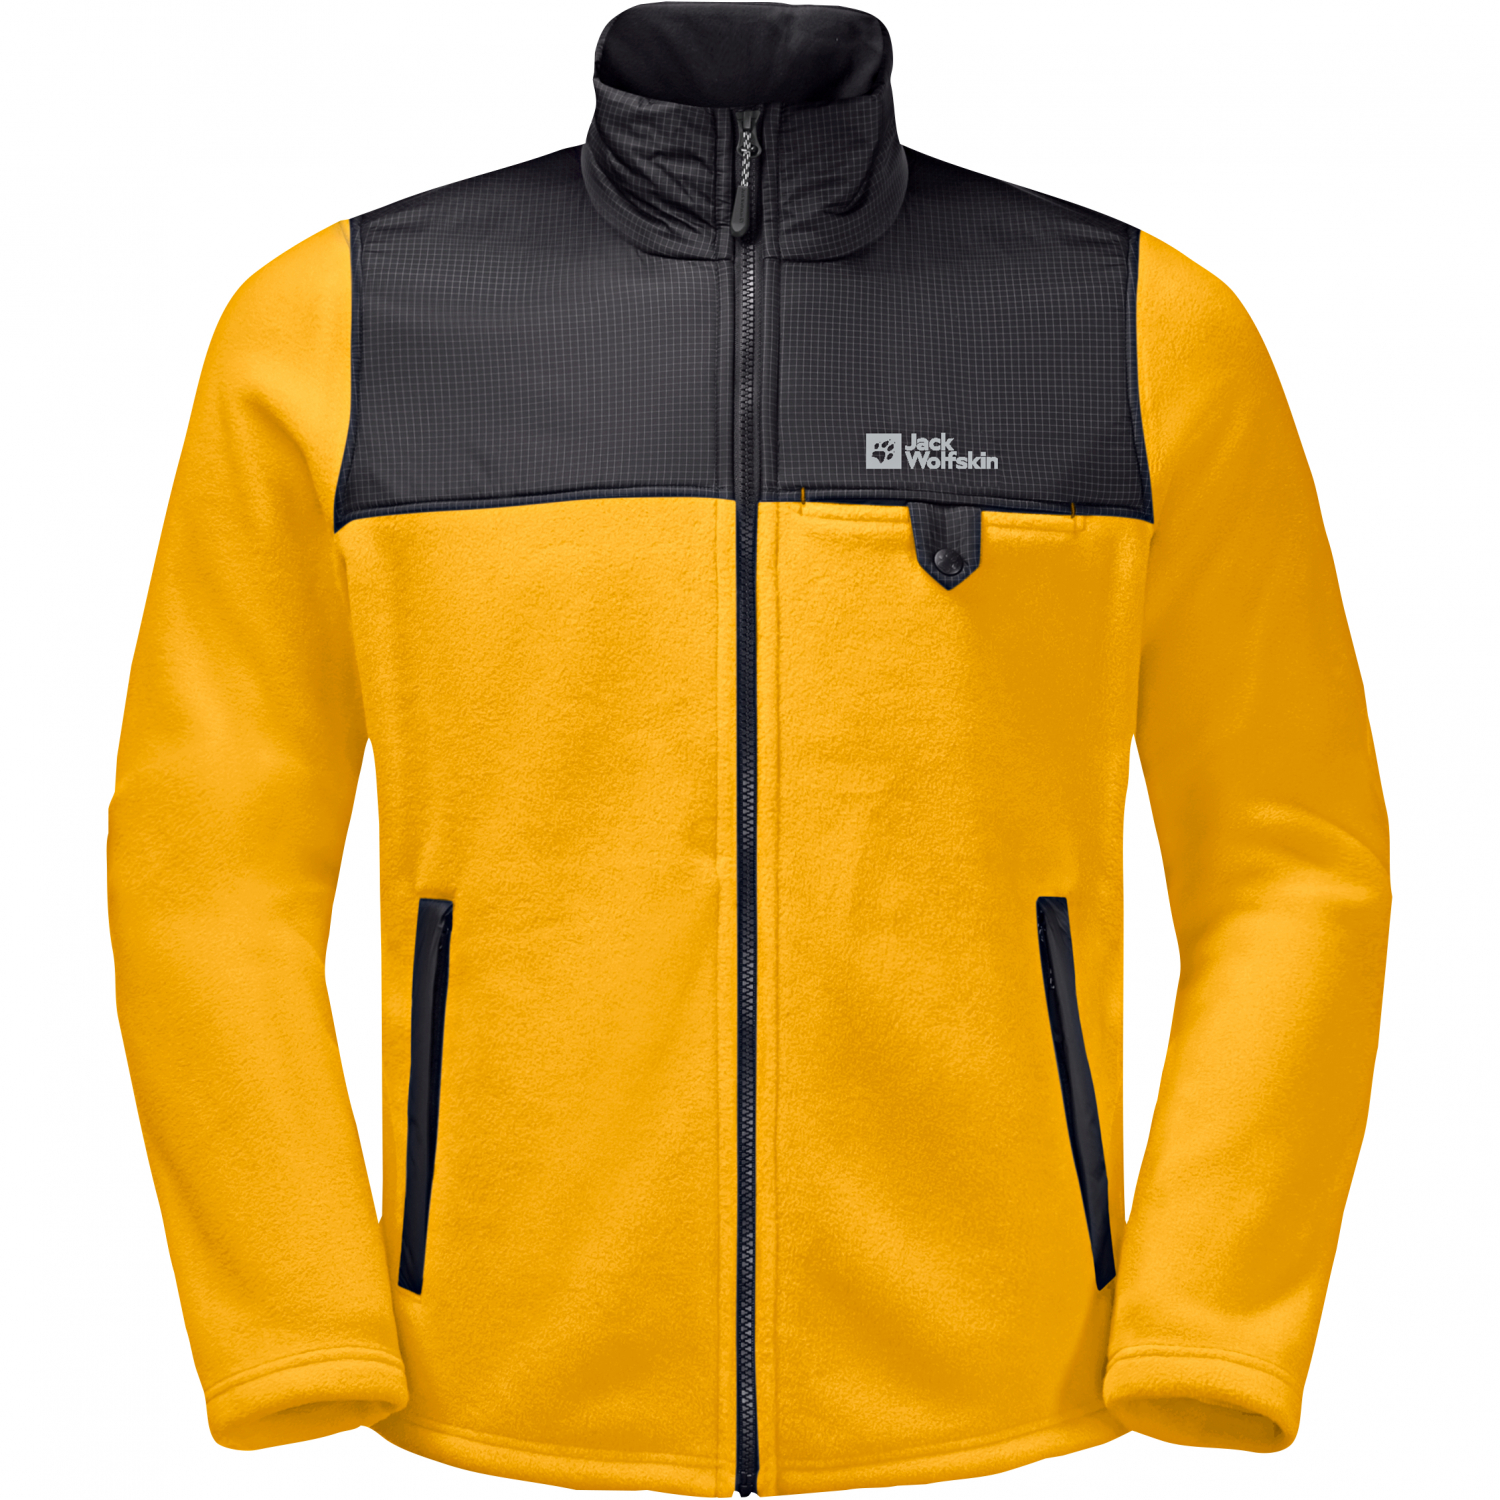 Jack Wolfskin Mens DNA Grizzly fleece jacket (yellow/black) at low prices |  Askari Fishing Shop | 